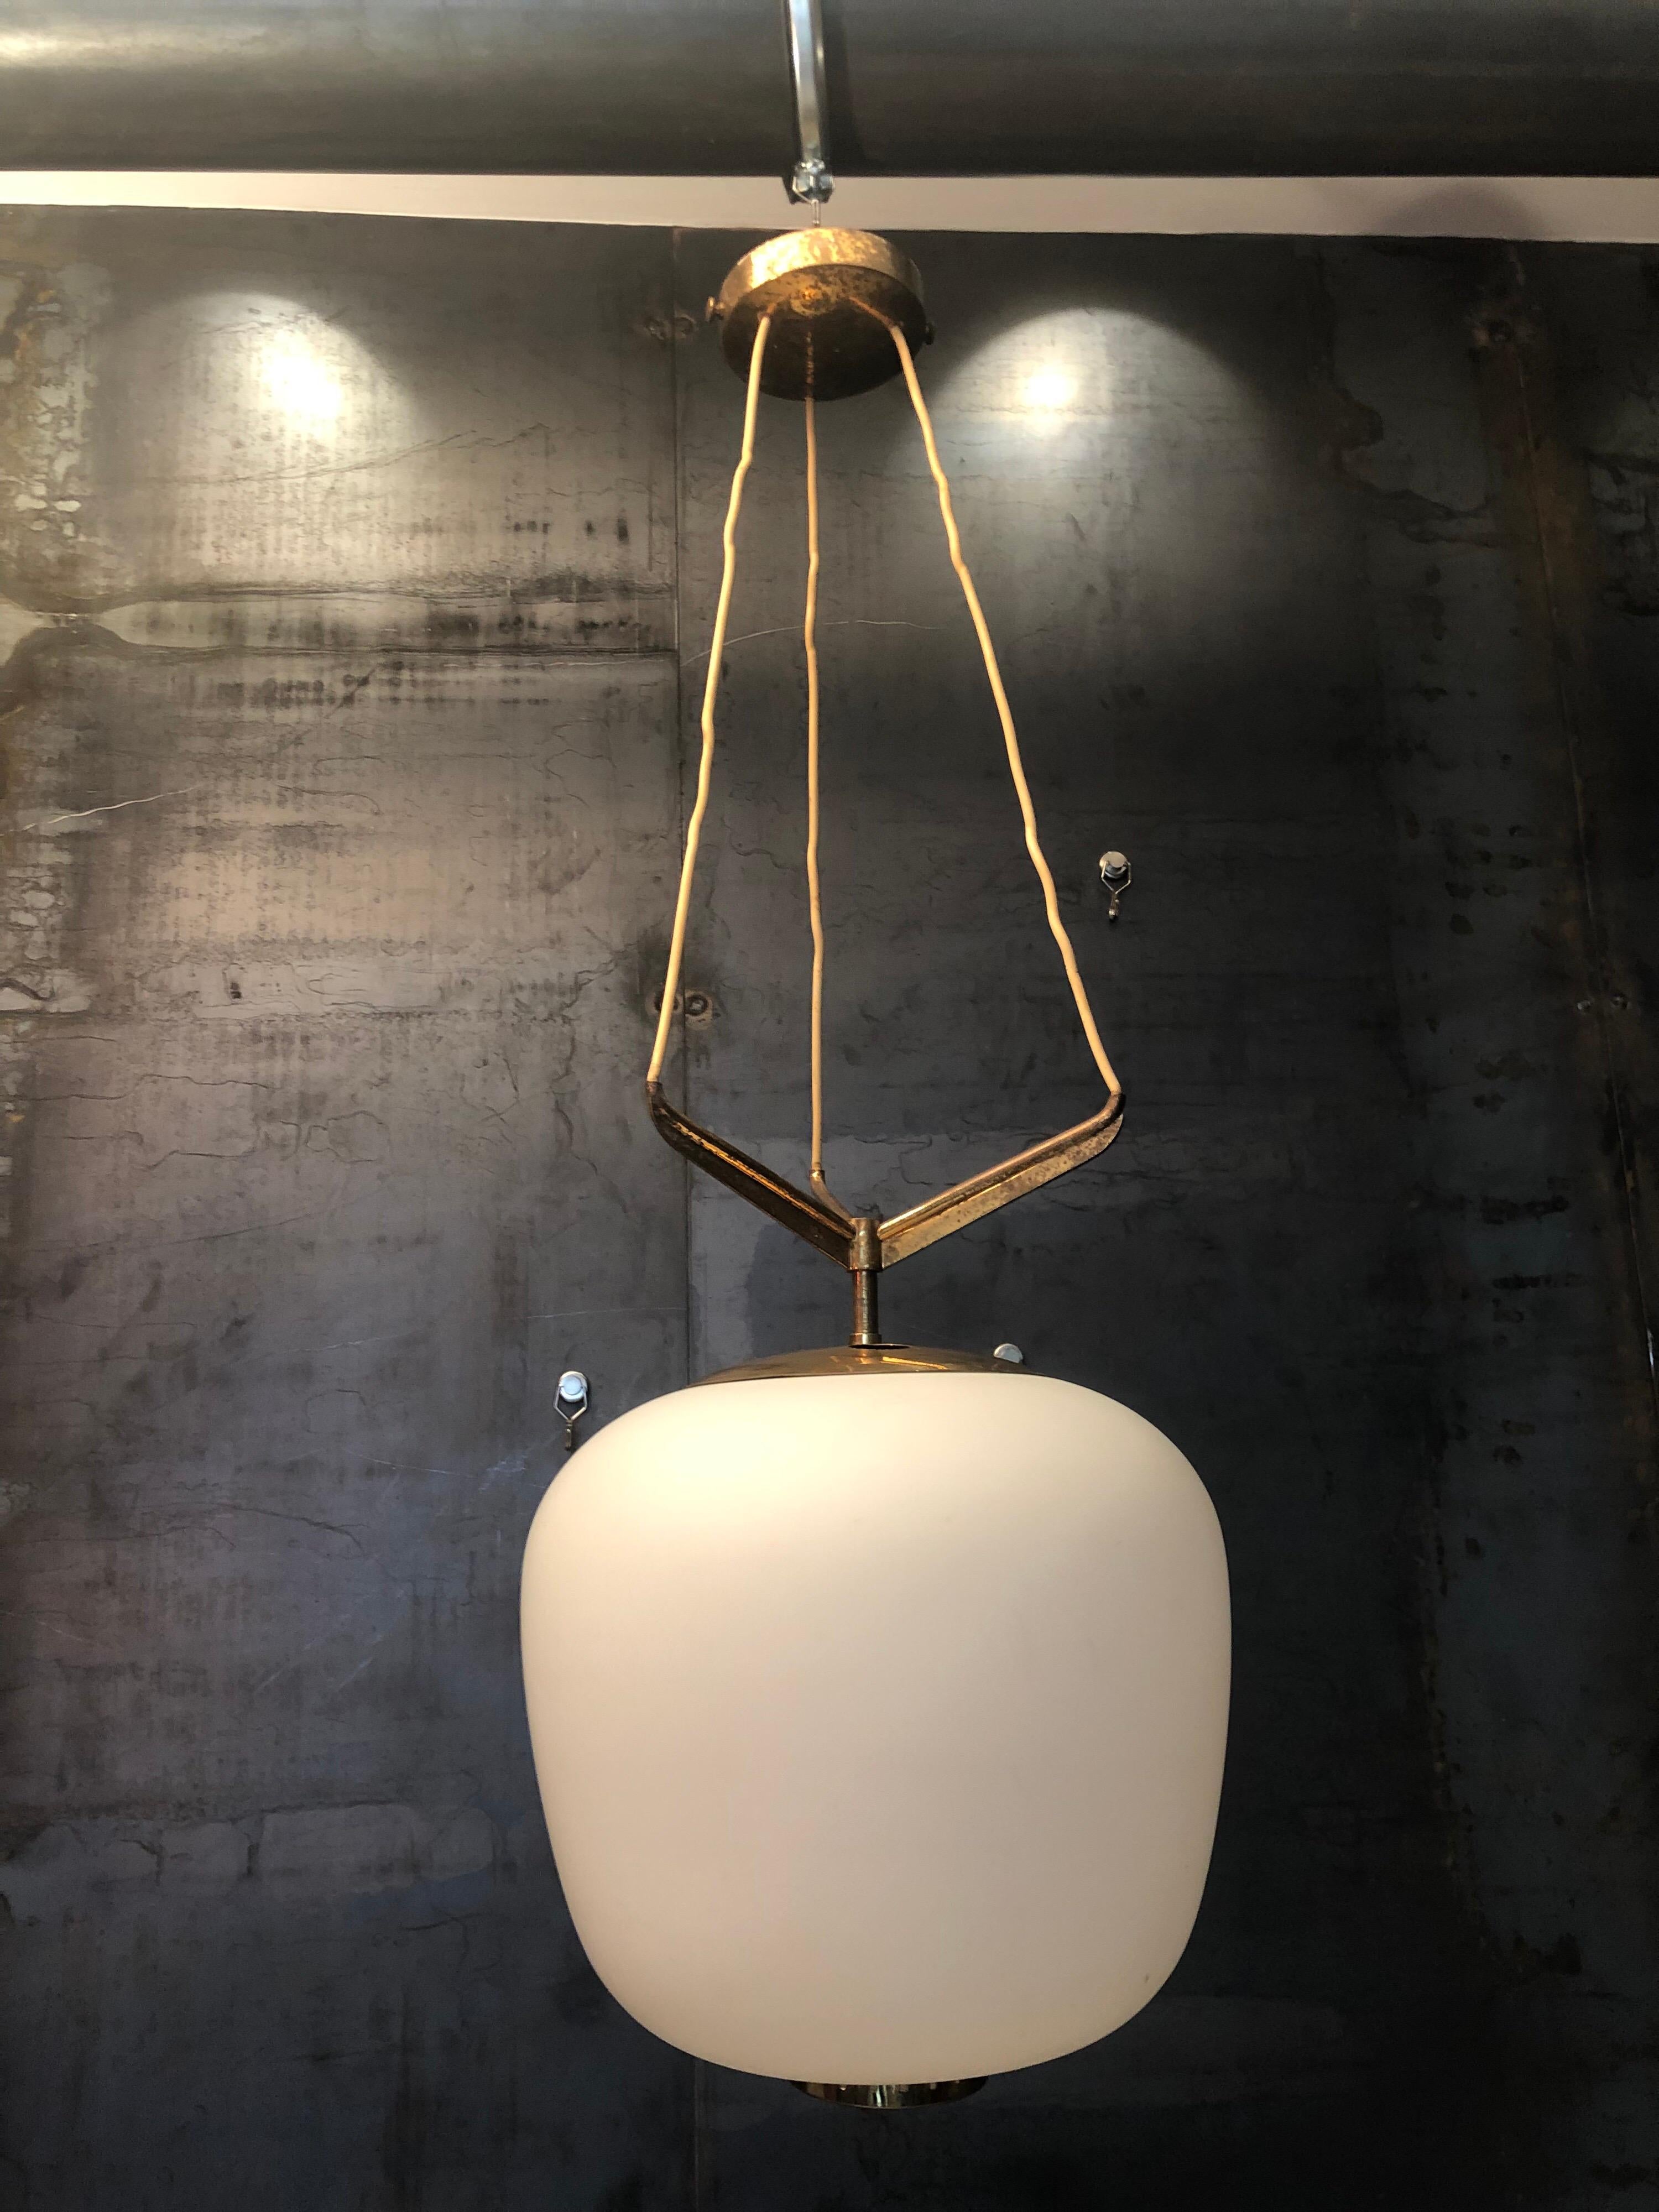 Great vintage conditions for this pendant light produced in Italy by Stilnovo Milano during the 1950s. This model is published in the Stilnovo vintage catalogue. There is the label too. Glass with no cracks or chips, brass parts with original patina